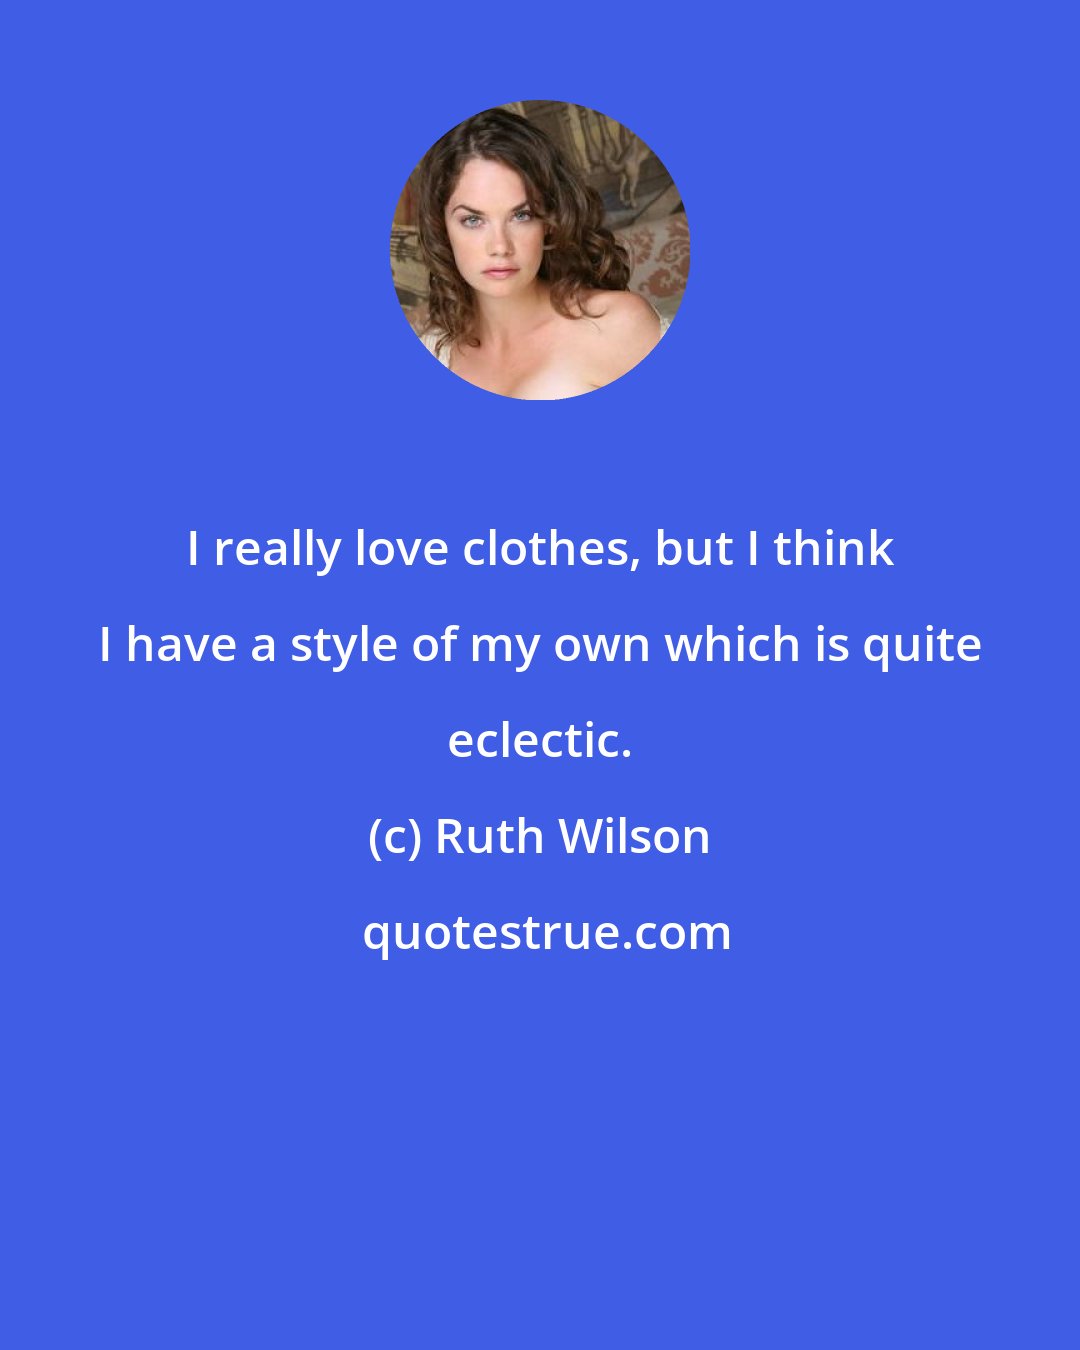 Ruth Wilson: I really love clothes, but I think I have a style of my own which is quite eclectic.